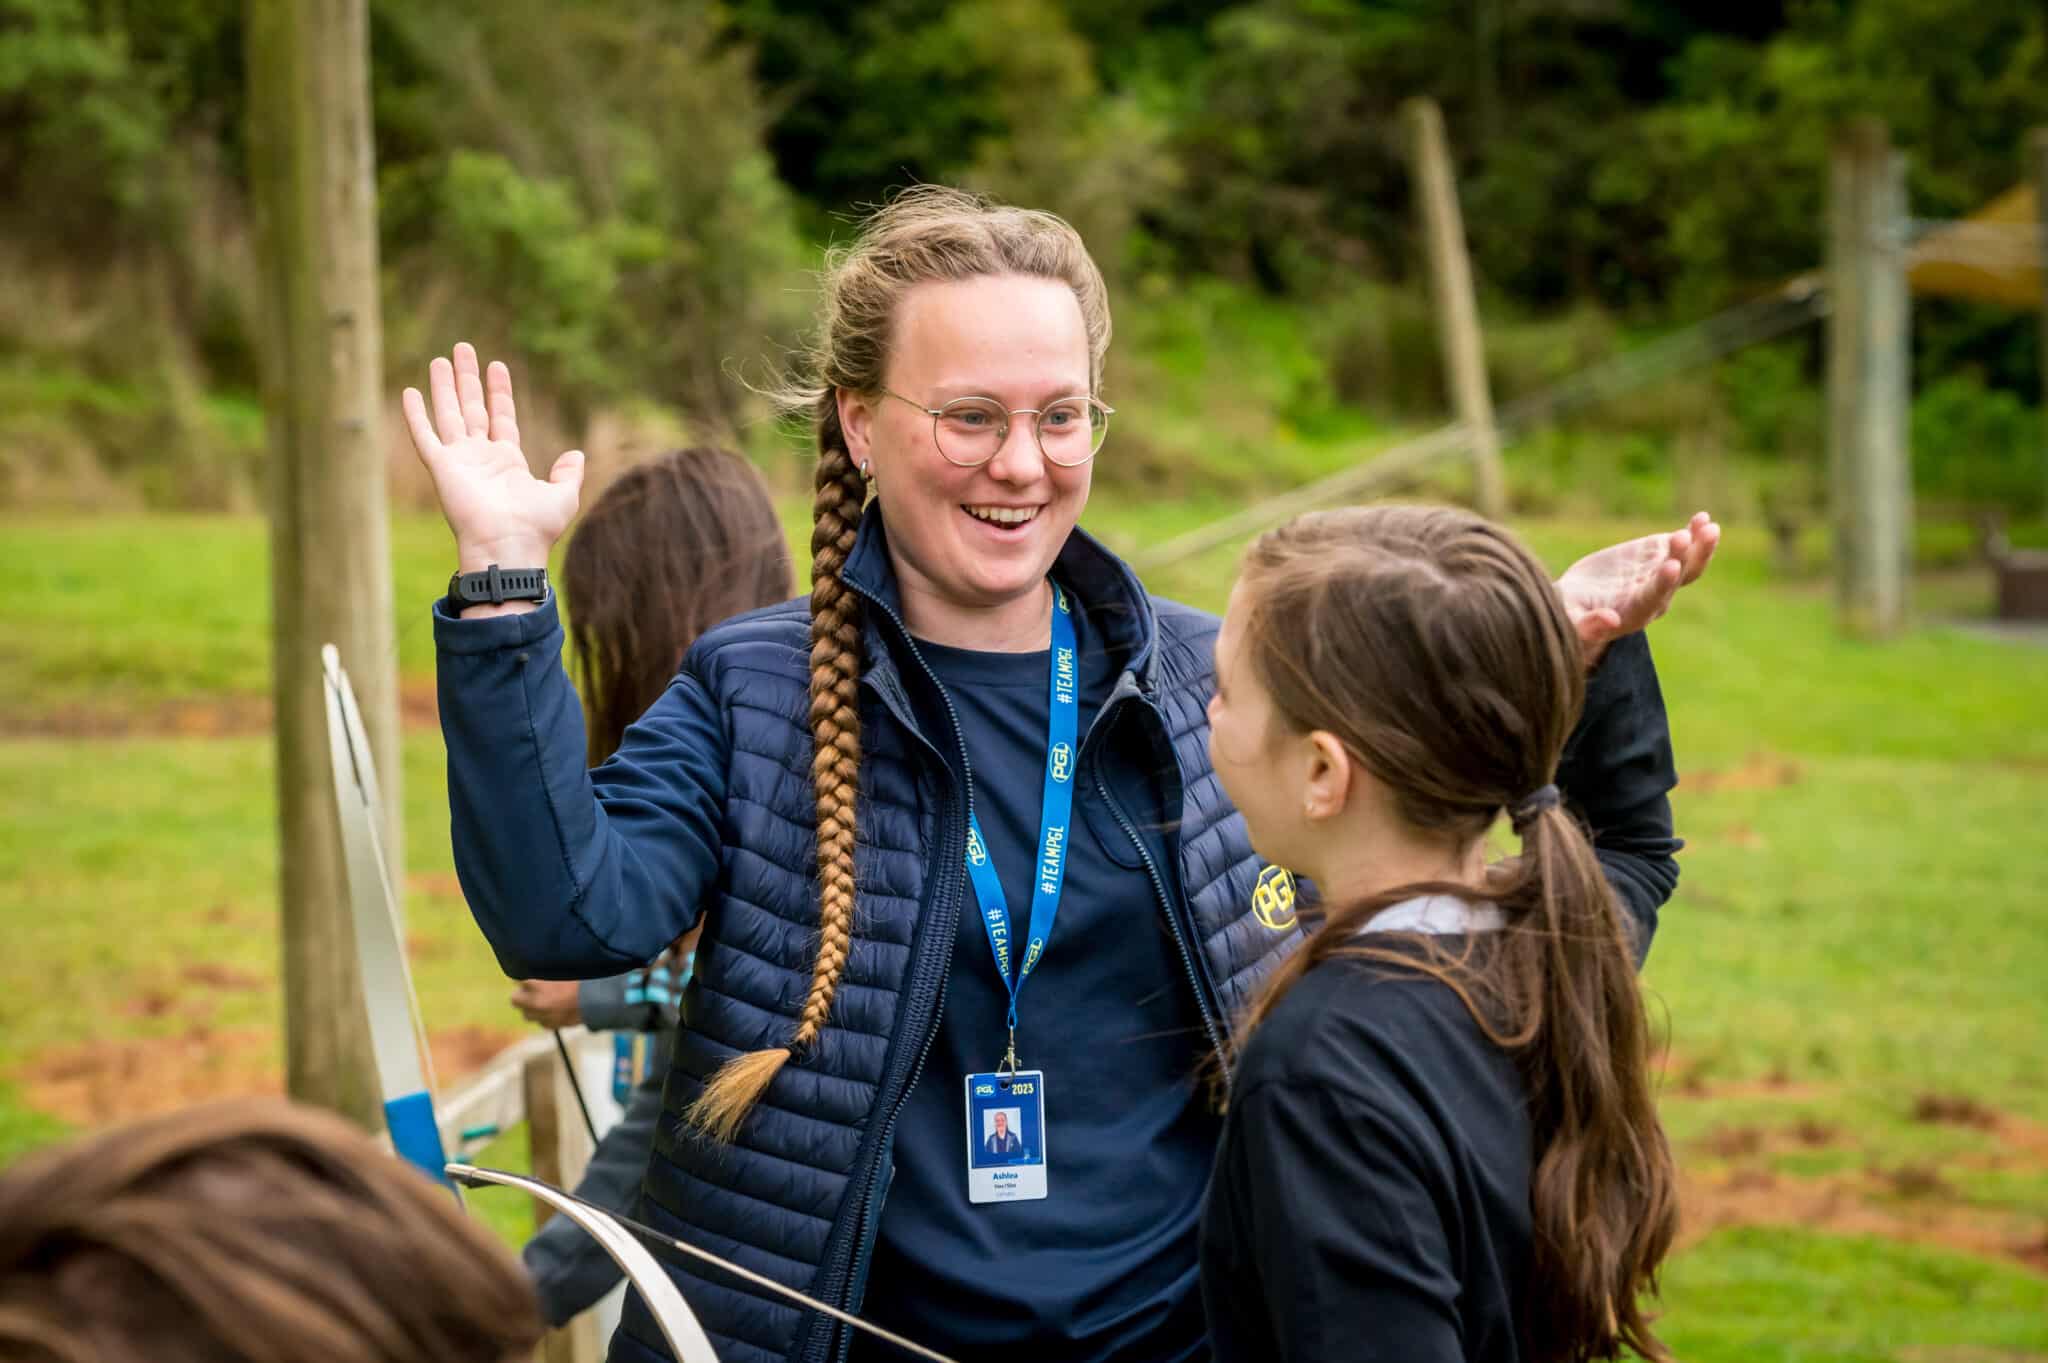 A woman with braided hair and glasses, wearing a lanyard, enthusiastically gestures while talking to a young girl during a school trip outdoors.